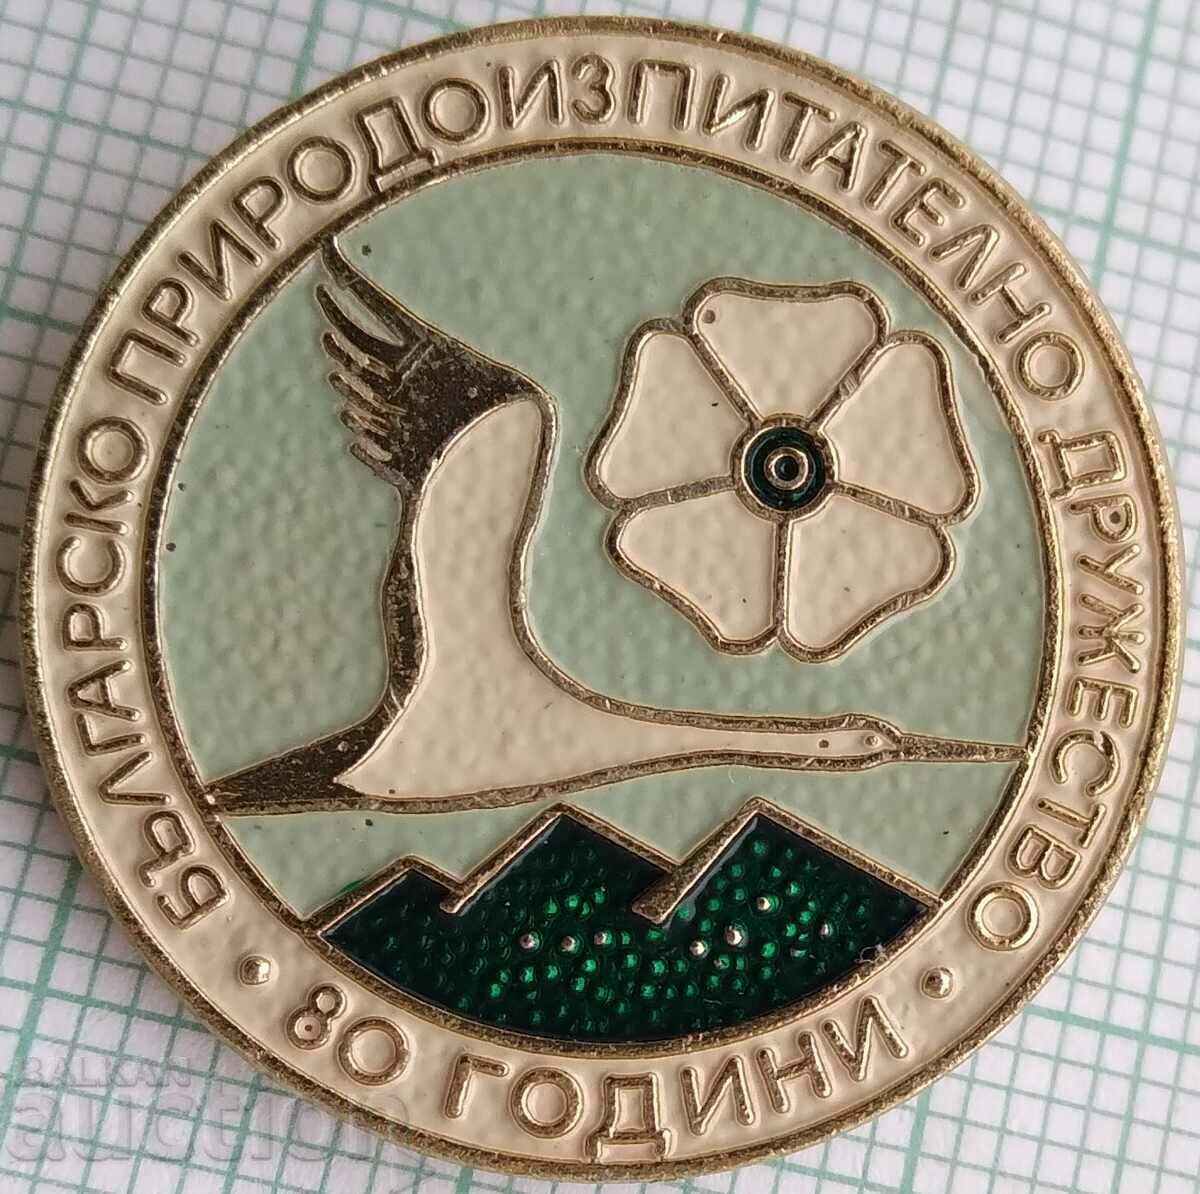 15806 Badge - 80 years Bulgarian Nature Research Society